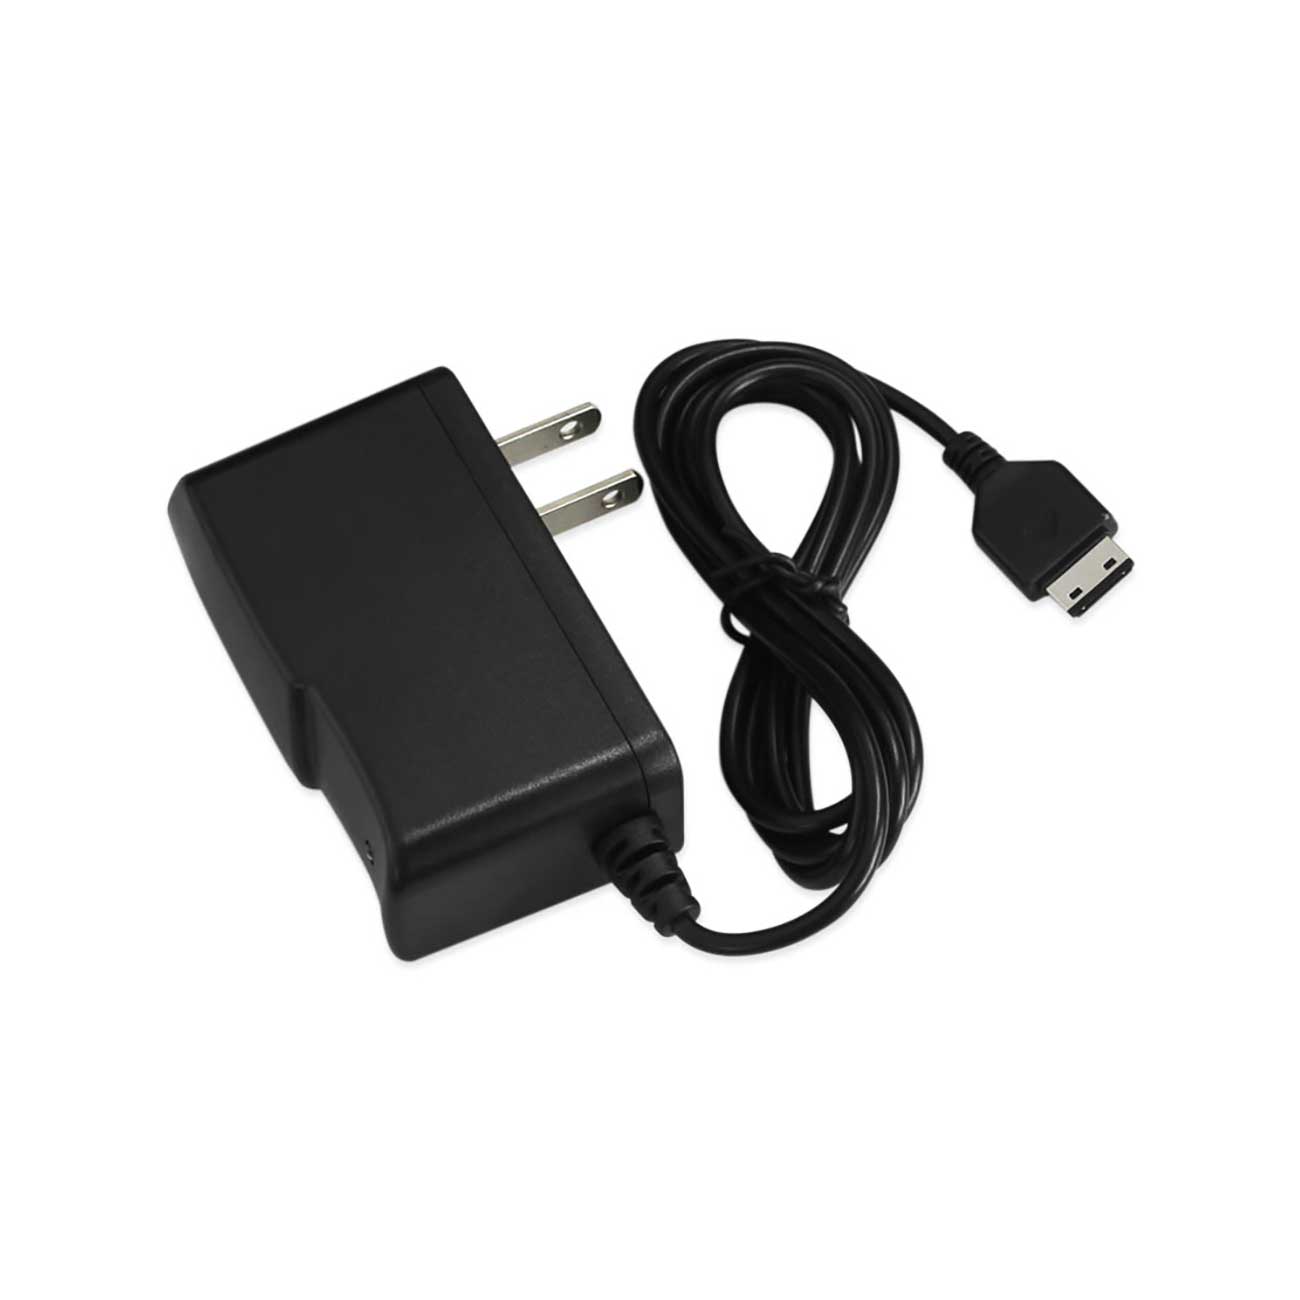 Cable USB Travel Adapter Charger Portable Reiko Samsung 300/510 Black Color